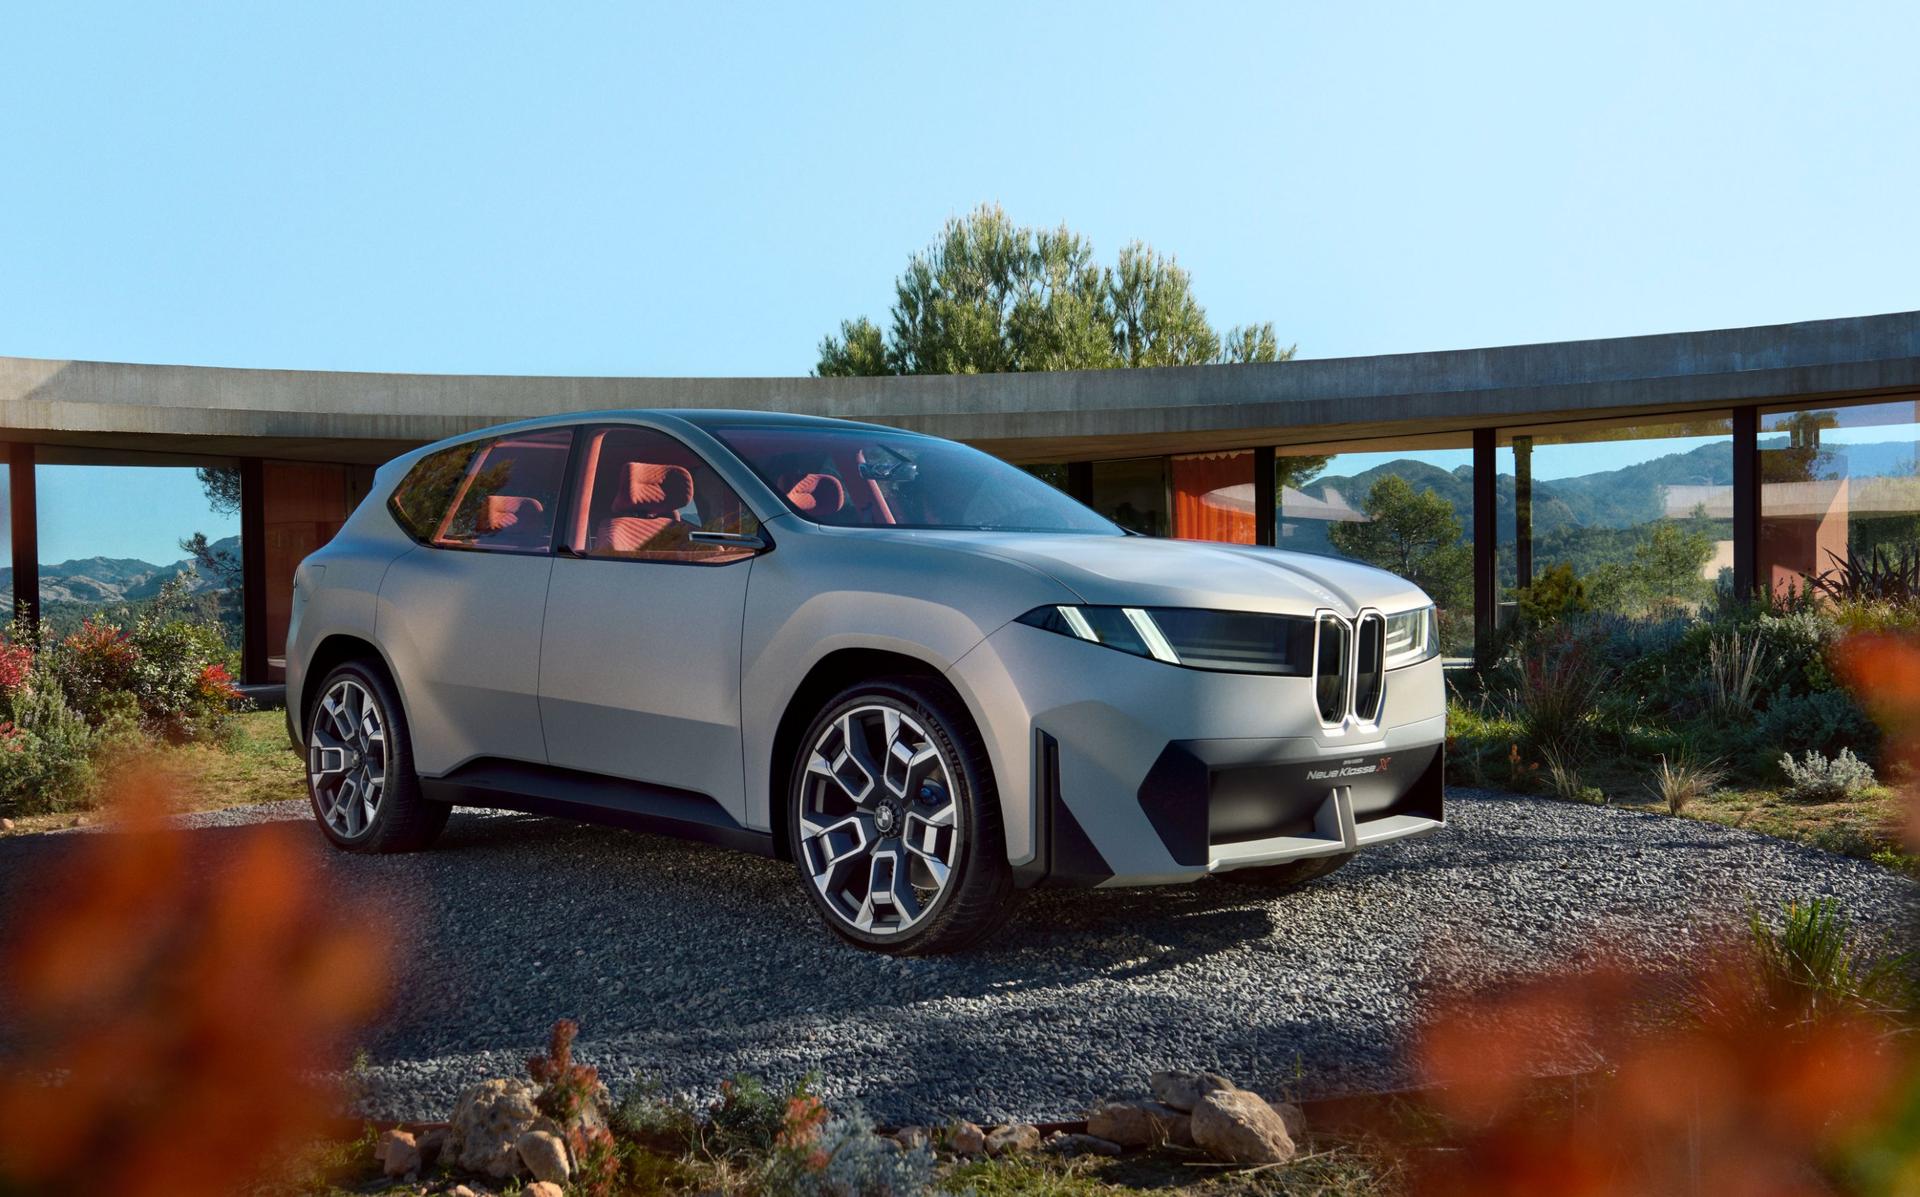 BMW took the wraps off its latest electric SUV concept, the Vision Neue Klasse X. Think of it as a pre-cursor to the next-generation BMW iX3 electric SUV.